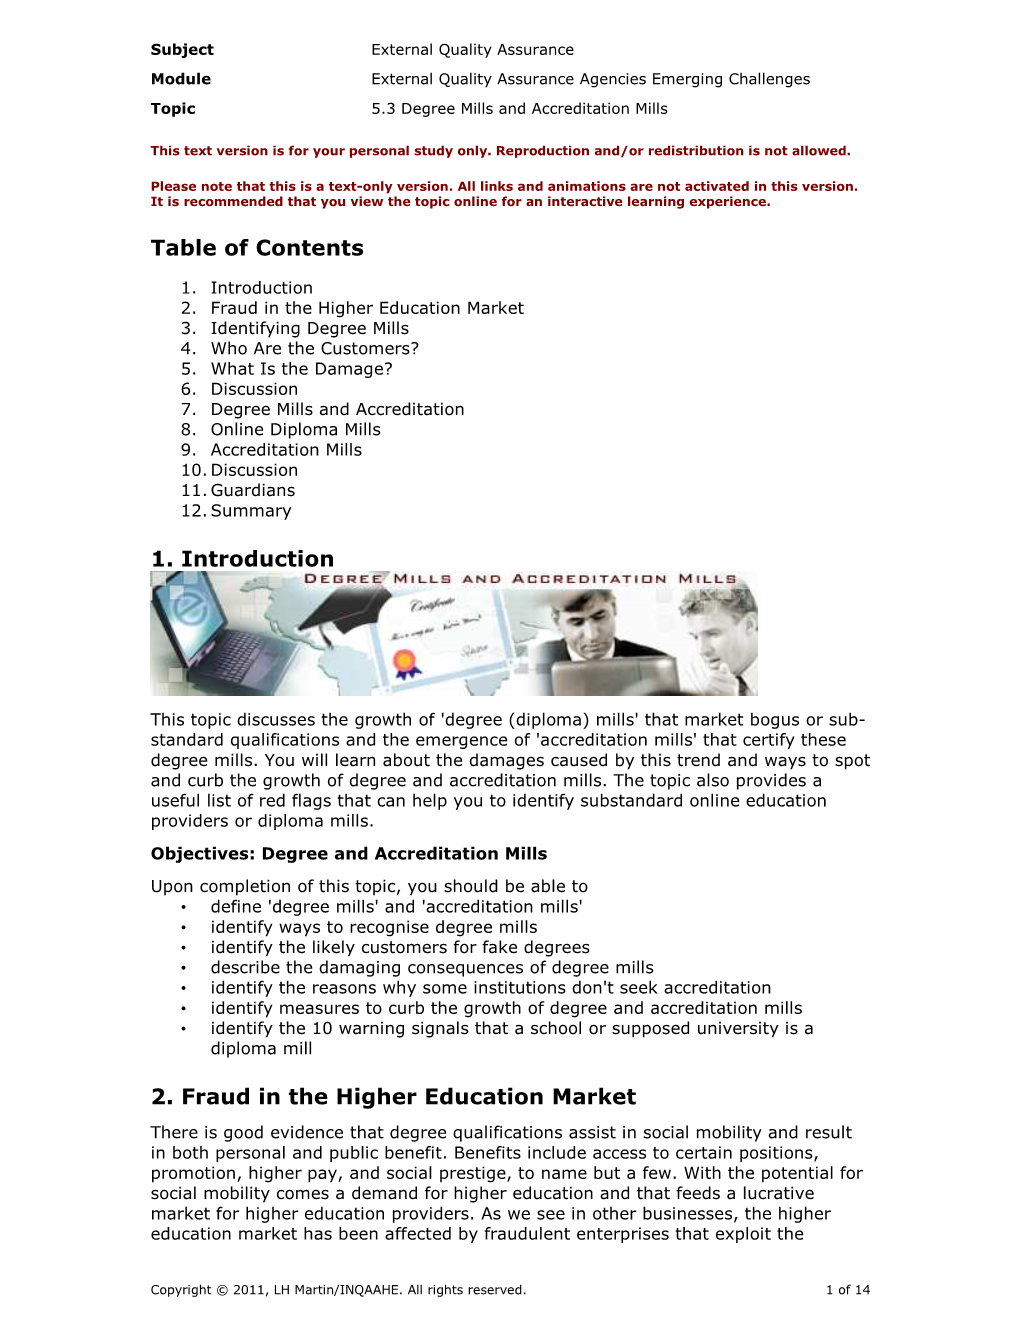 Table of Contents 1. Introduction 2. Fraud in the Higher Education Market